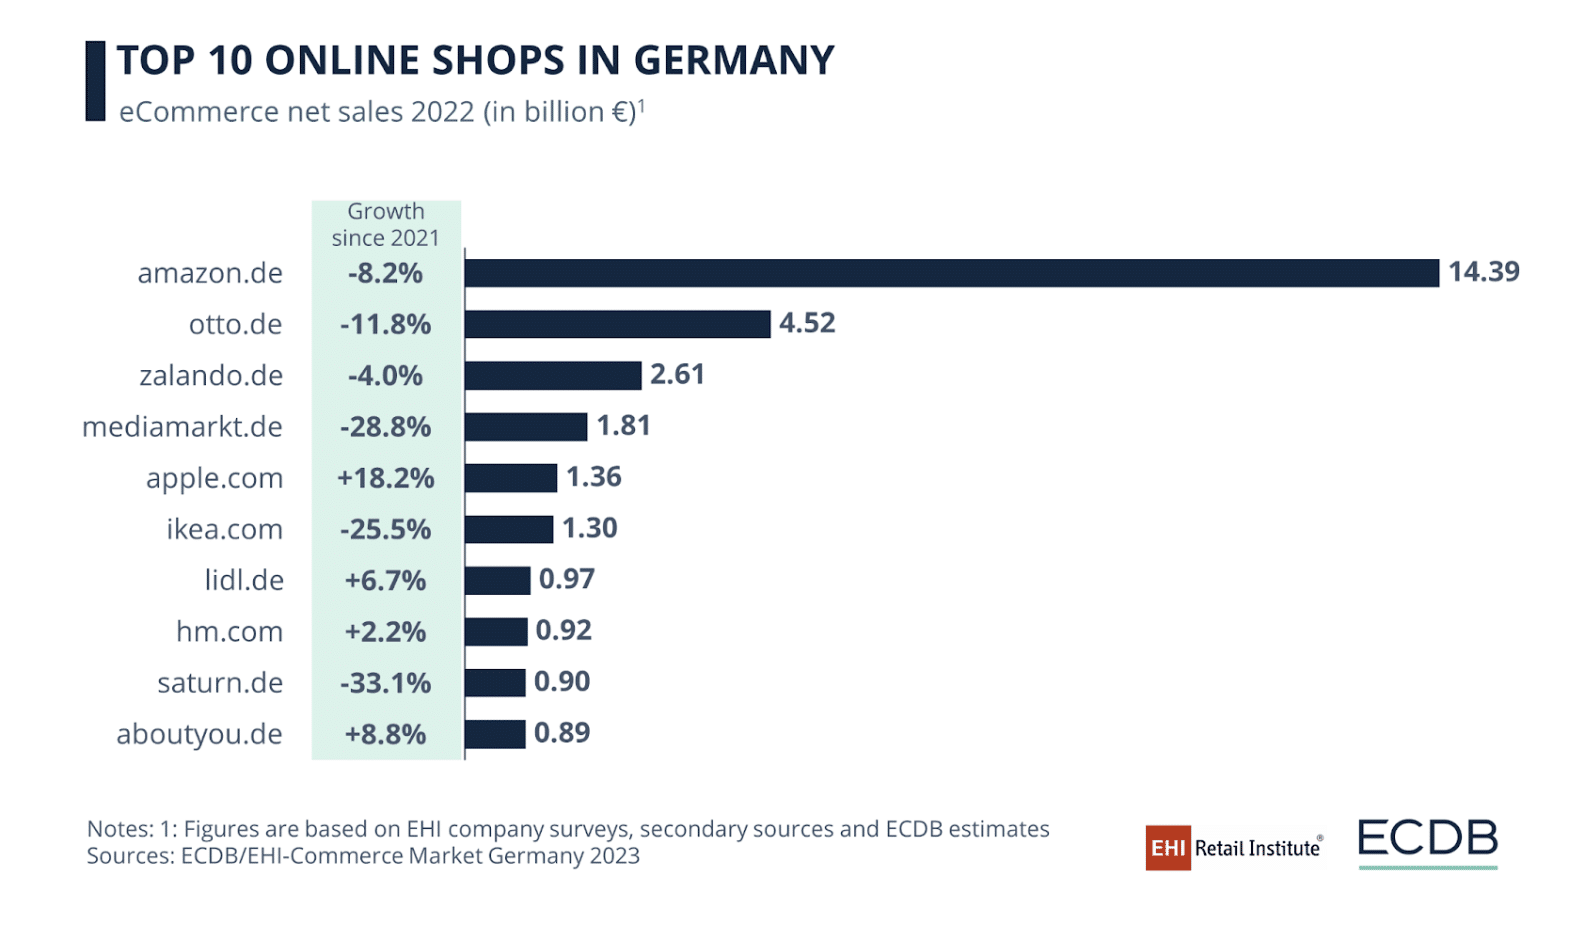 Top 10 e-commerce sites in Germany 2022